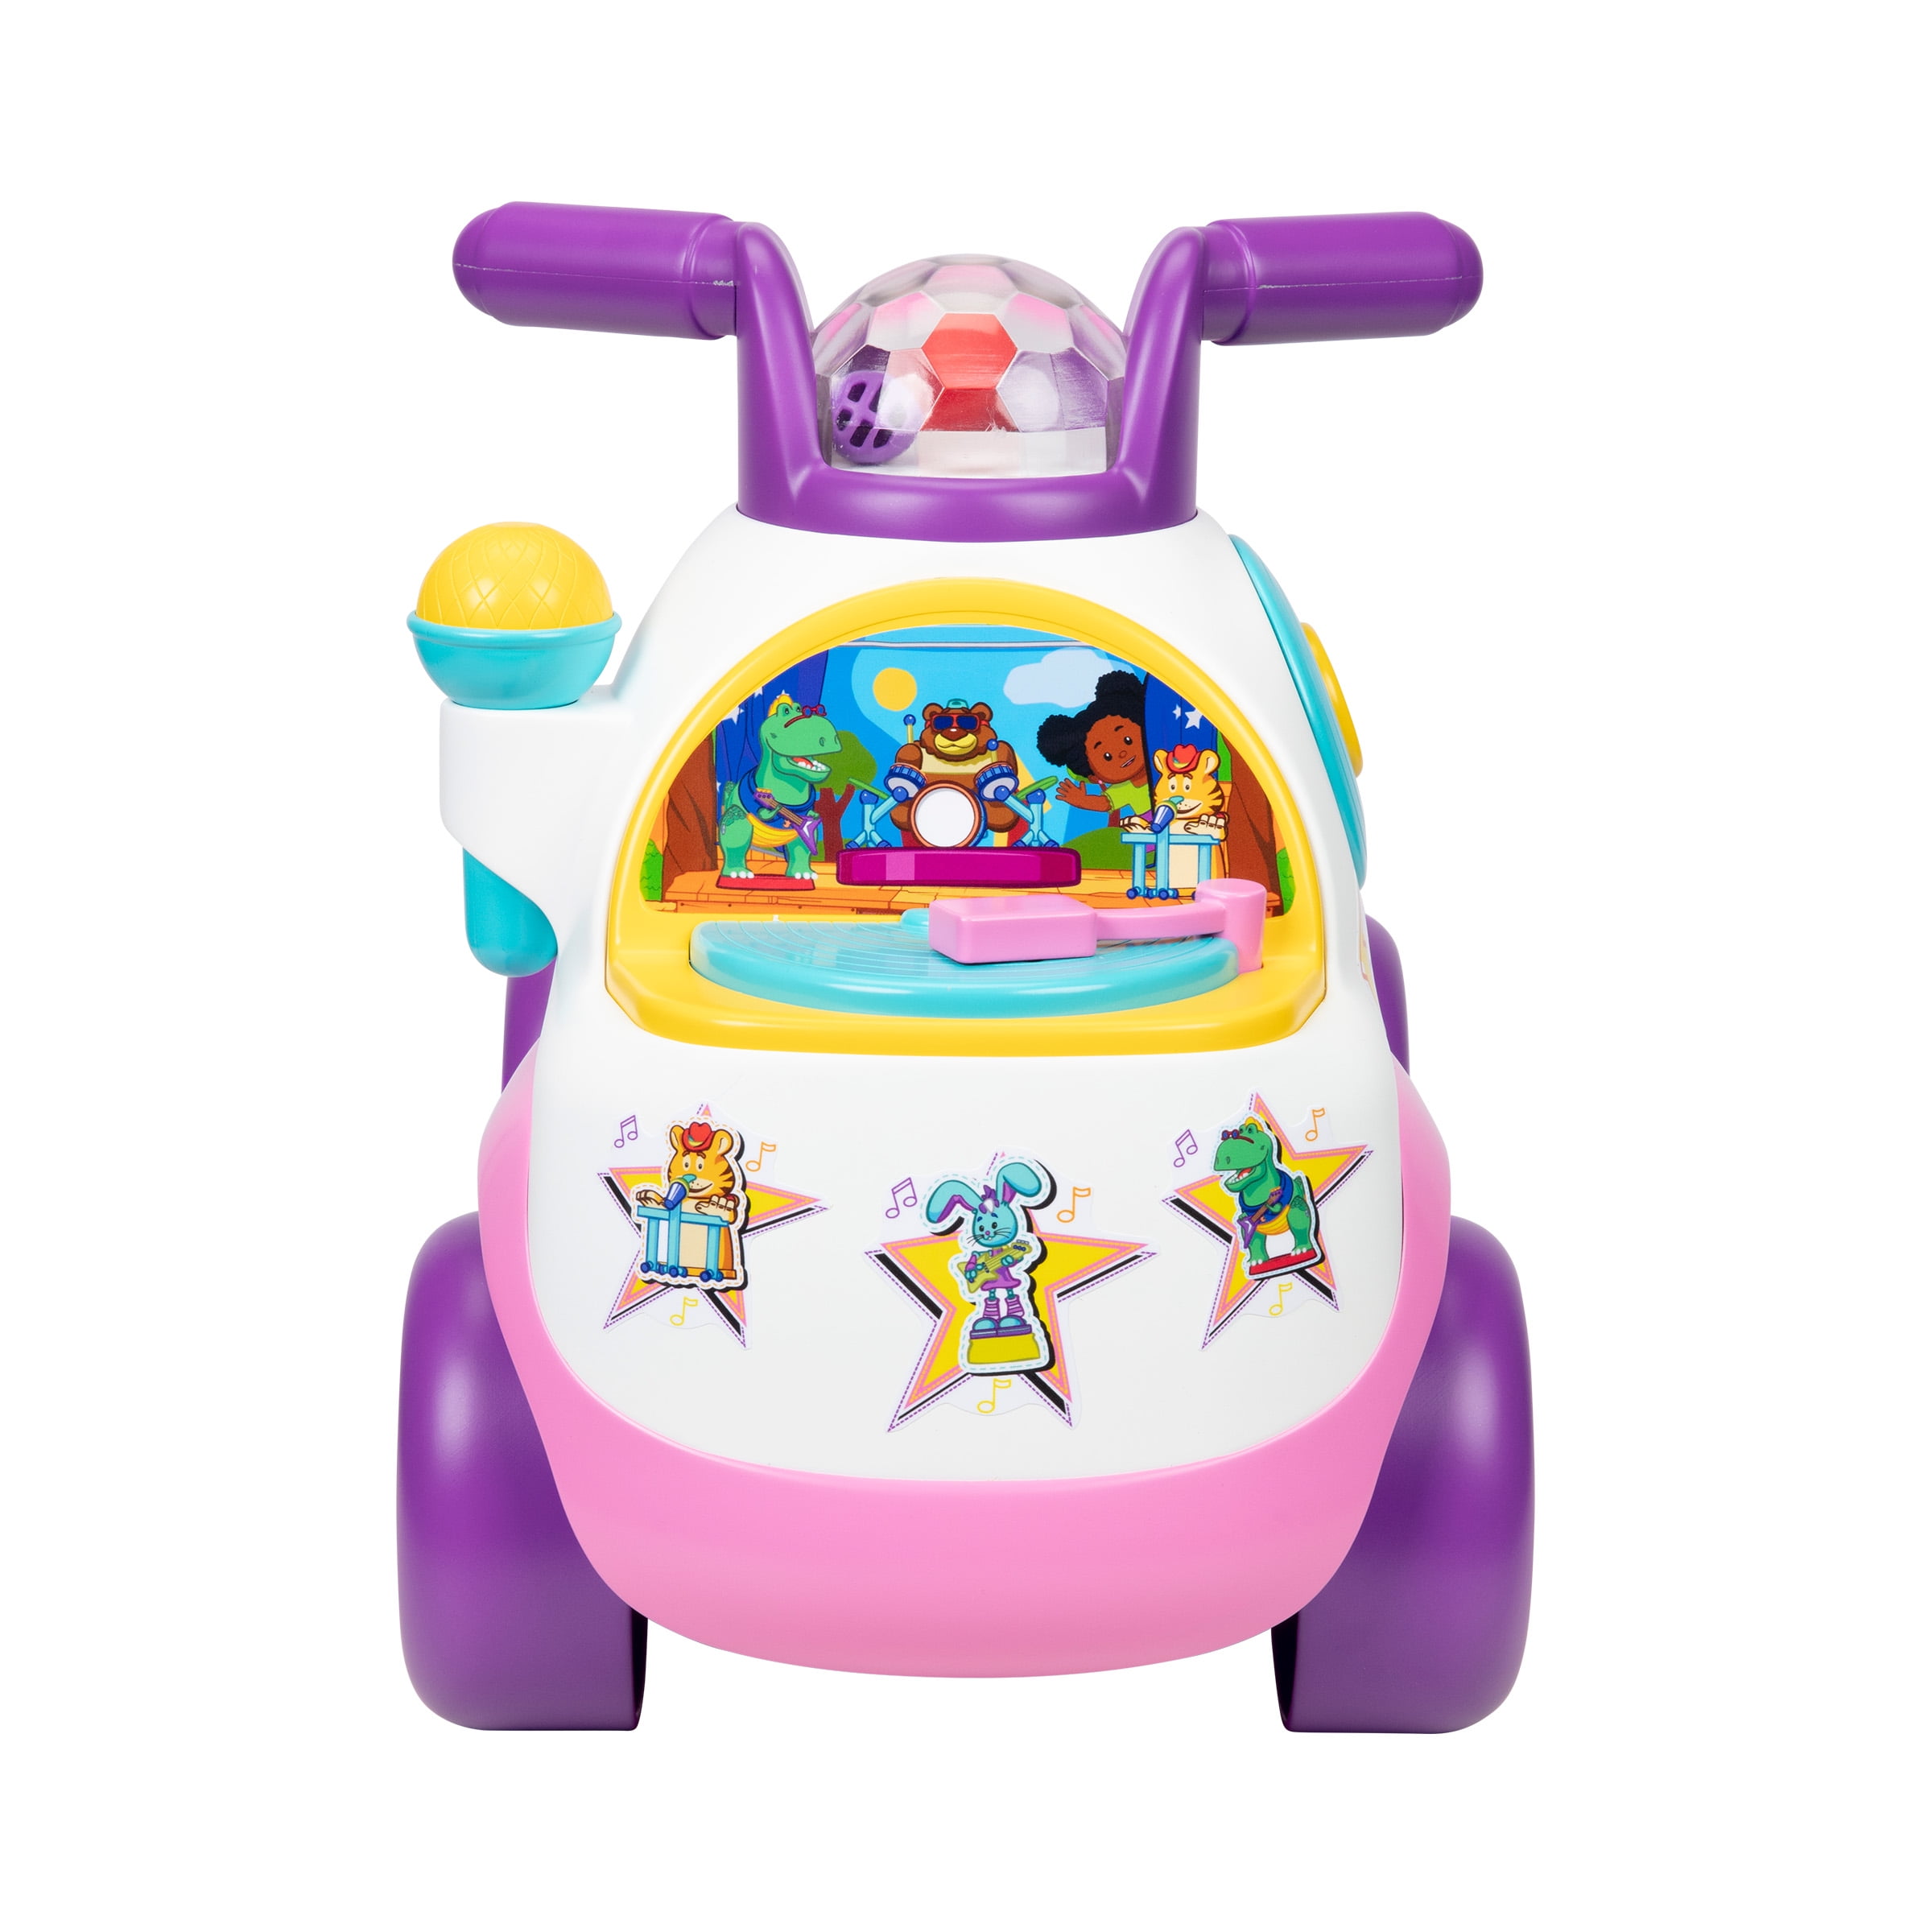 Little People Fisher-Price Movin’ n Groovin Pink Ride-On with Lights and Sounds - 1